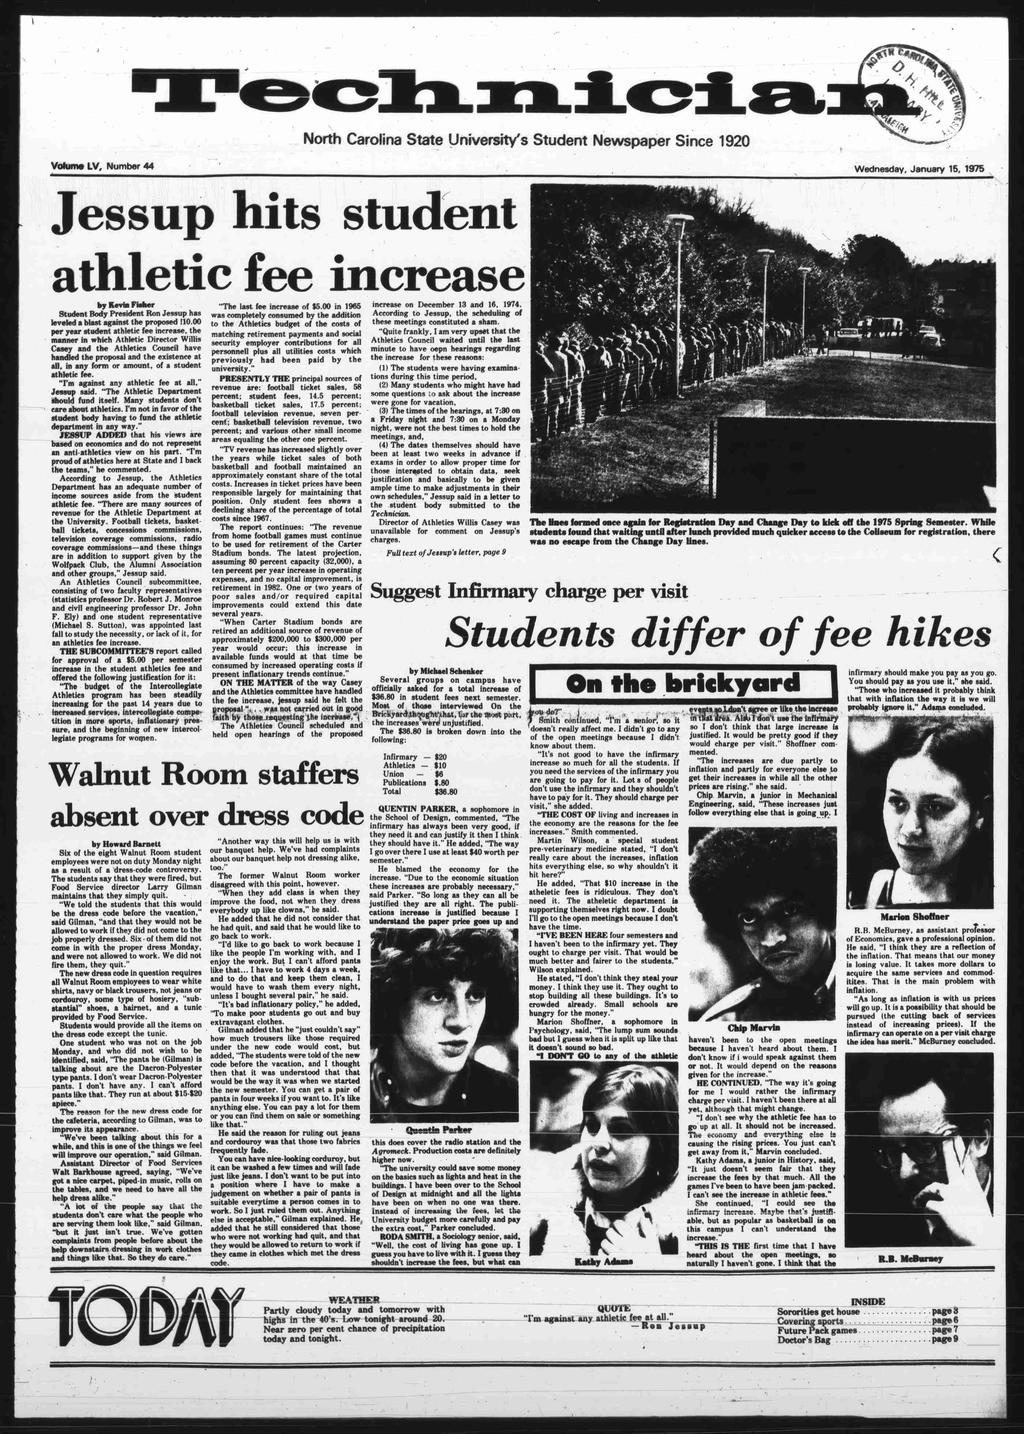 Technicia North Carolina State University s Student Newspaper Since 1920 Volume LV, Number 44 Wednesday, January 15, 1975 Jessup hits student athletic fee increase bylevh Fisher The last fee increase